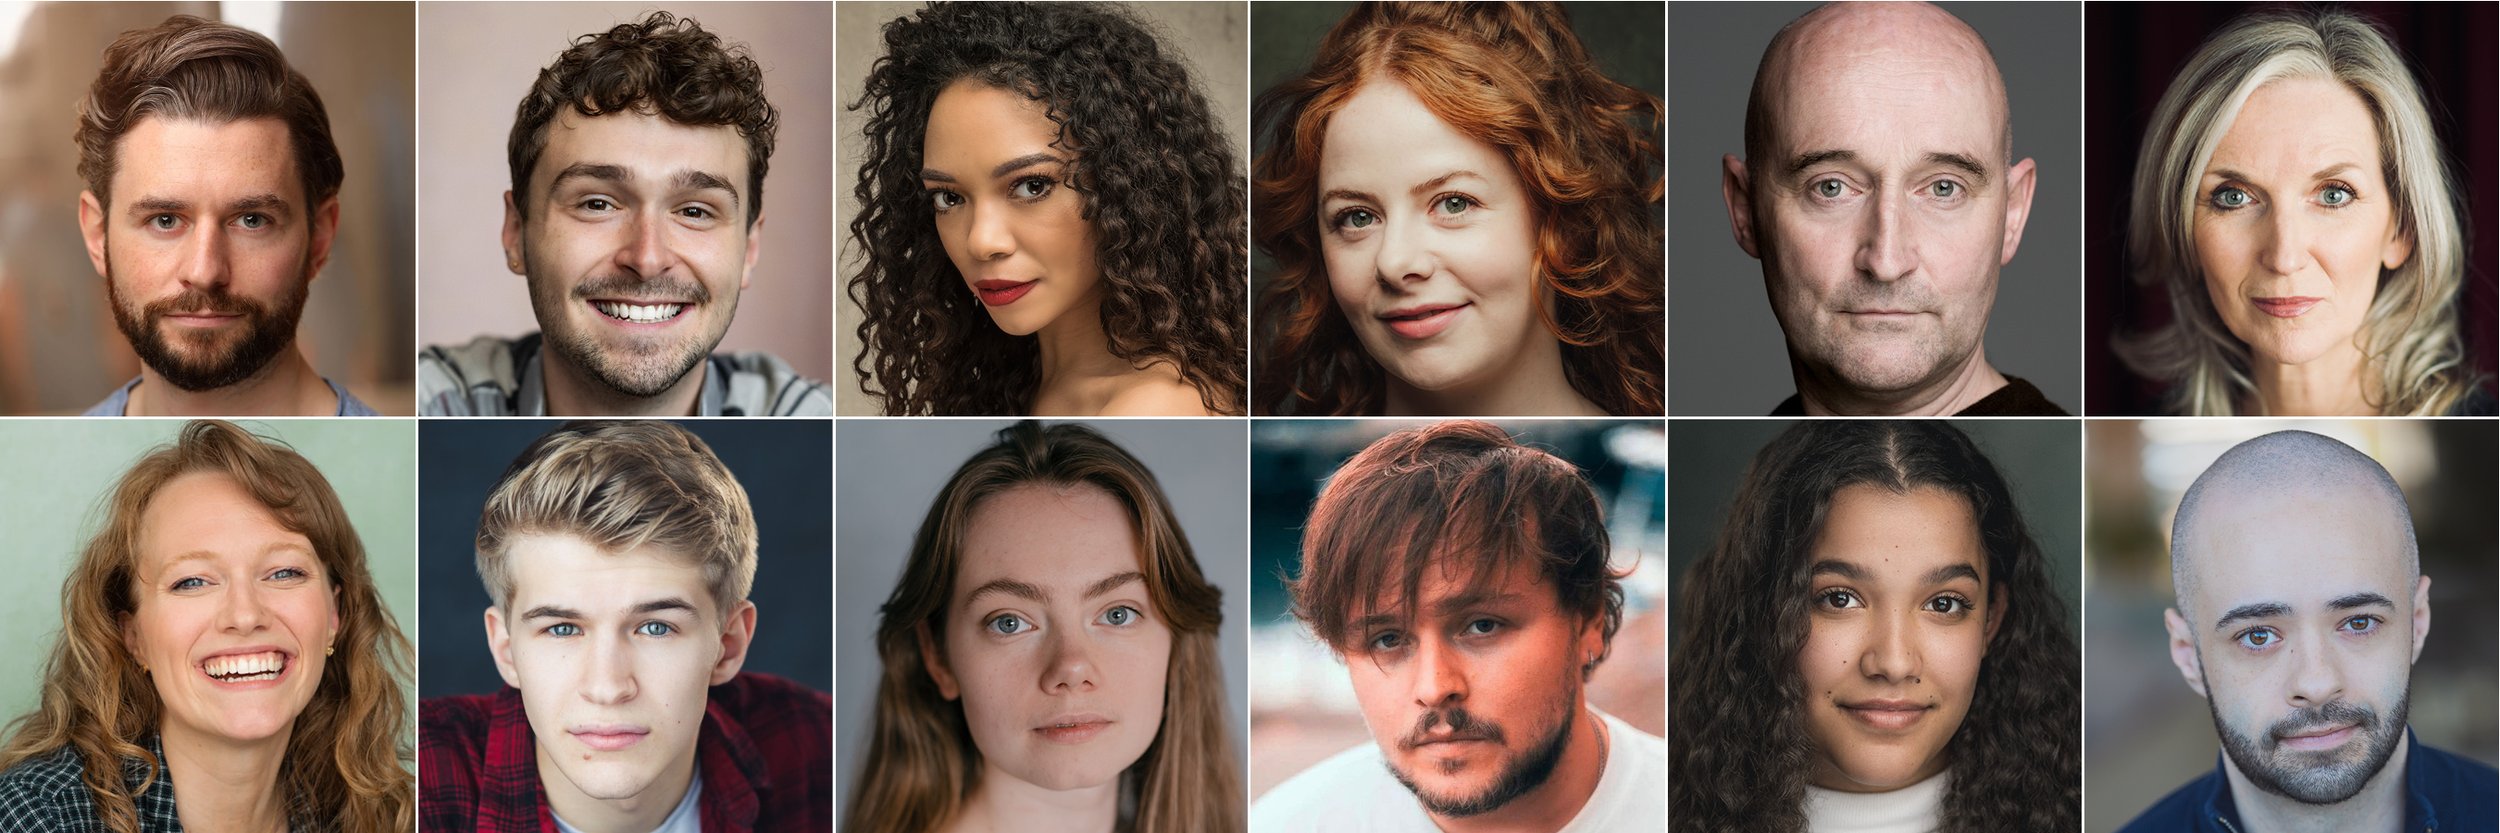 Full casting announced for The Lord Of The Rings at The Watermill